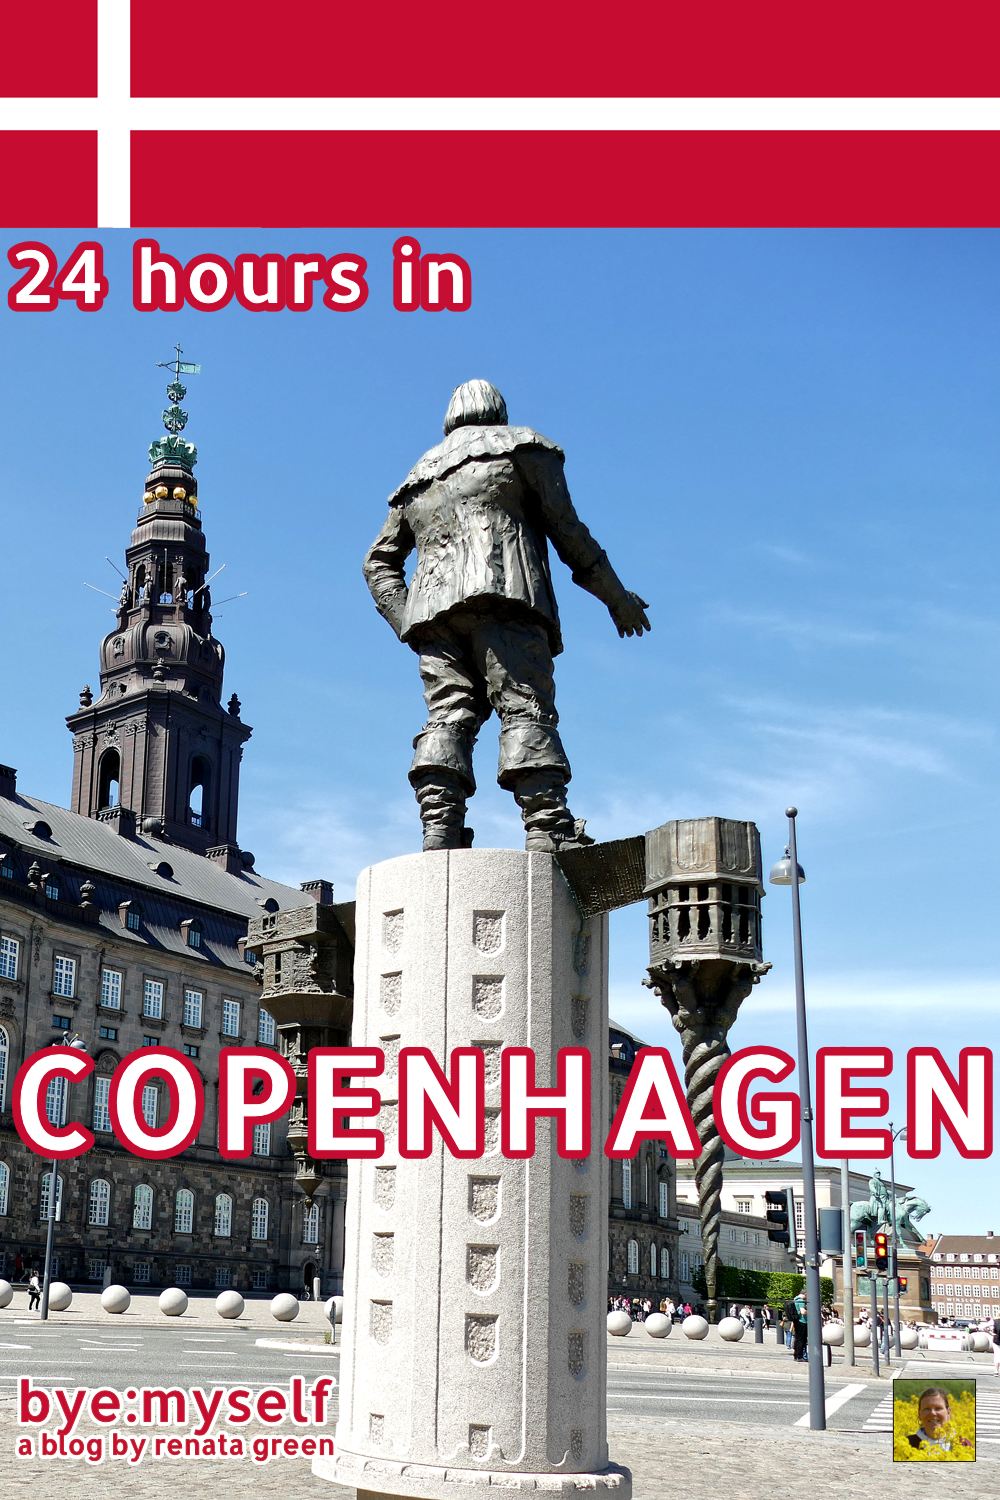 No matter for what reason you have a layover in Copenhagen: With my guide for up to 24 hours, you'll enjoy the city's best sides'n'sights. #copenhagen #denmark #europe #layover #stopover #24hours #daytrip #citybreak #weekendtrip #byemyself